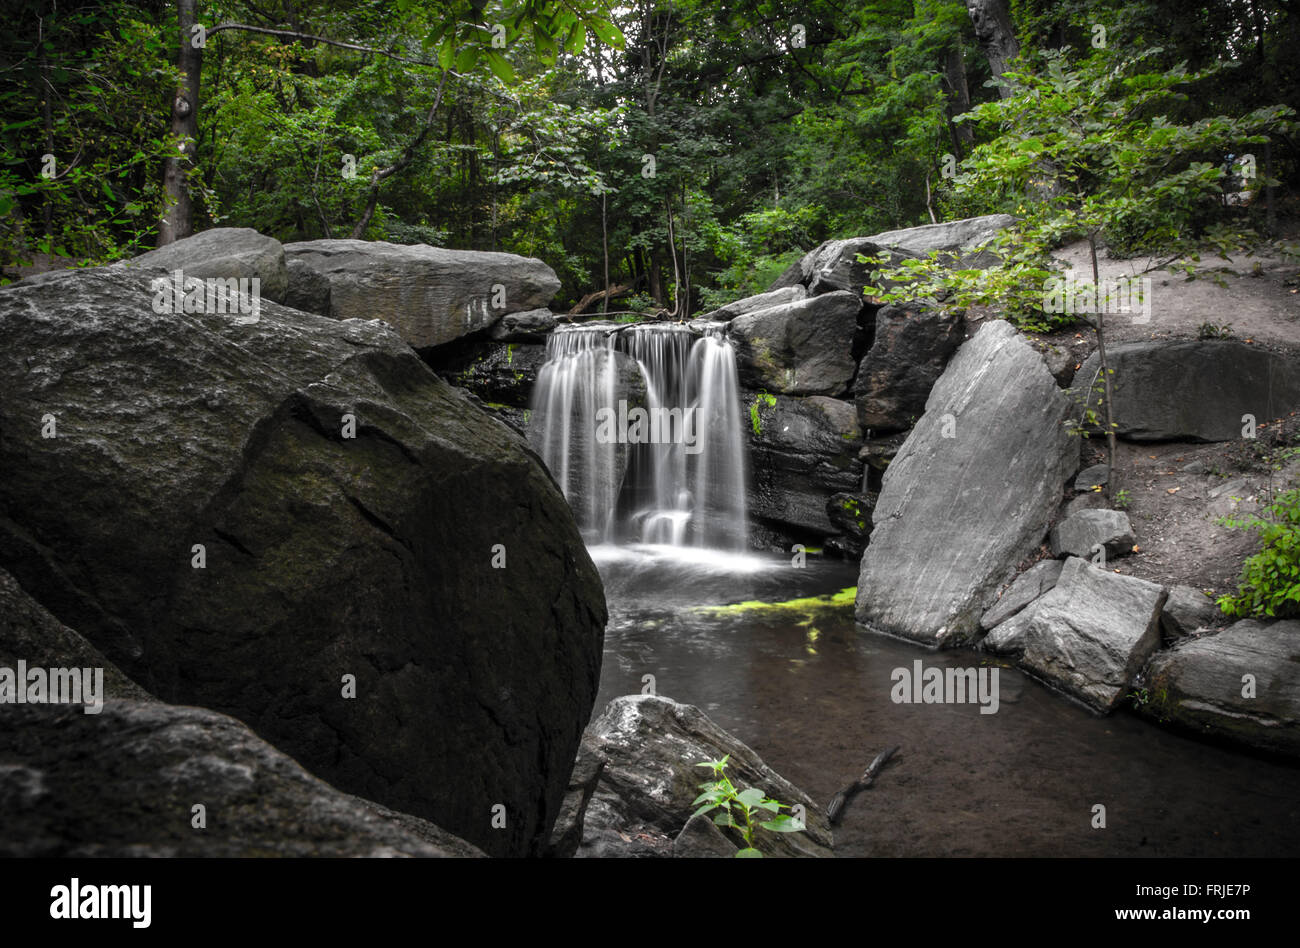 Waterfall in the North Woods of Central Park, New York City, USA Stock Photo